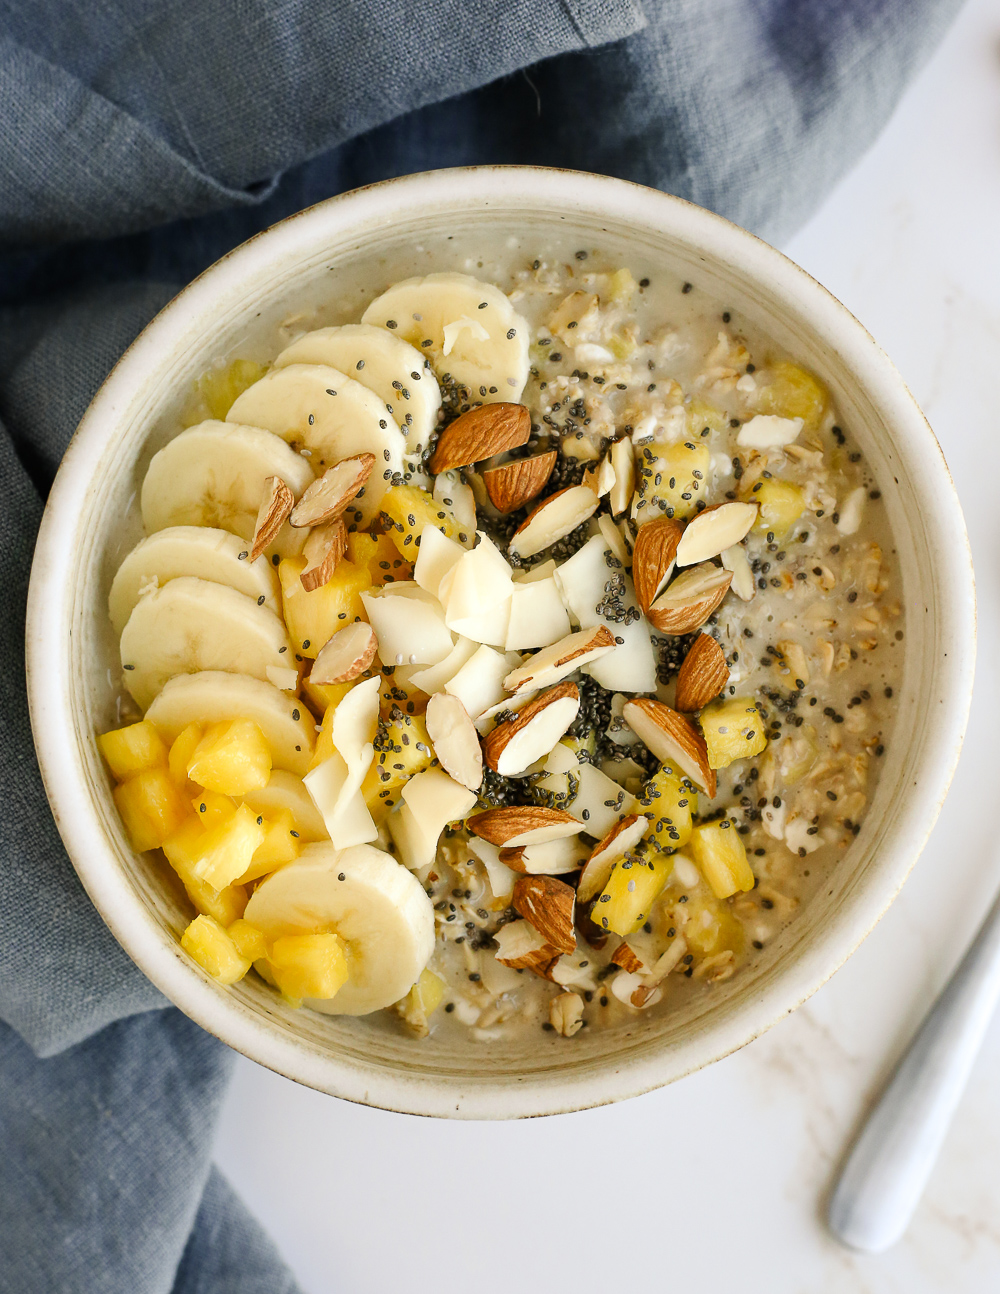 A bowl of pineapple banana protein oats, topped with toasted coconut, sliced almonds, and chia seeds